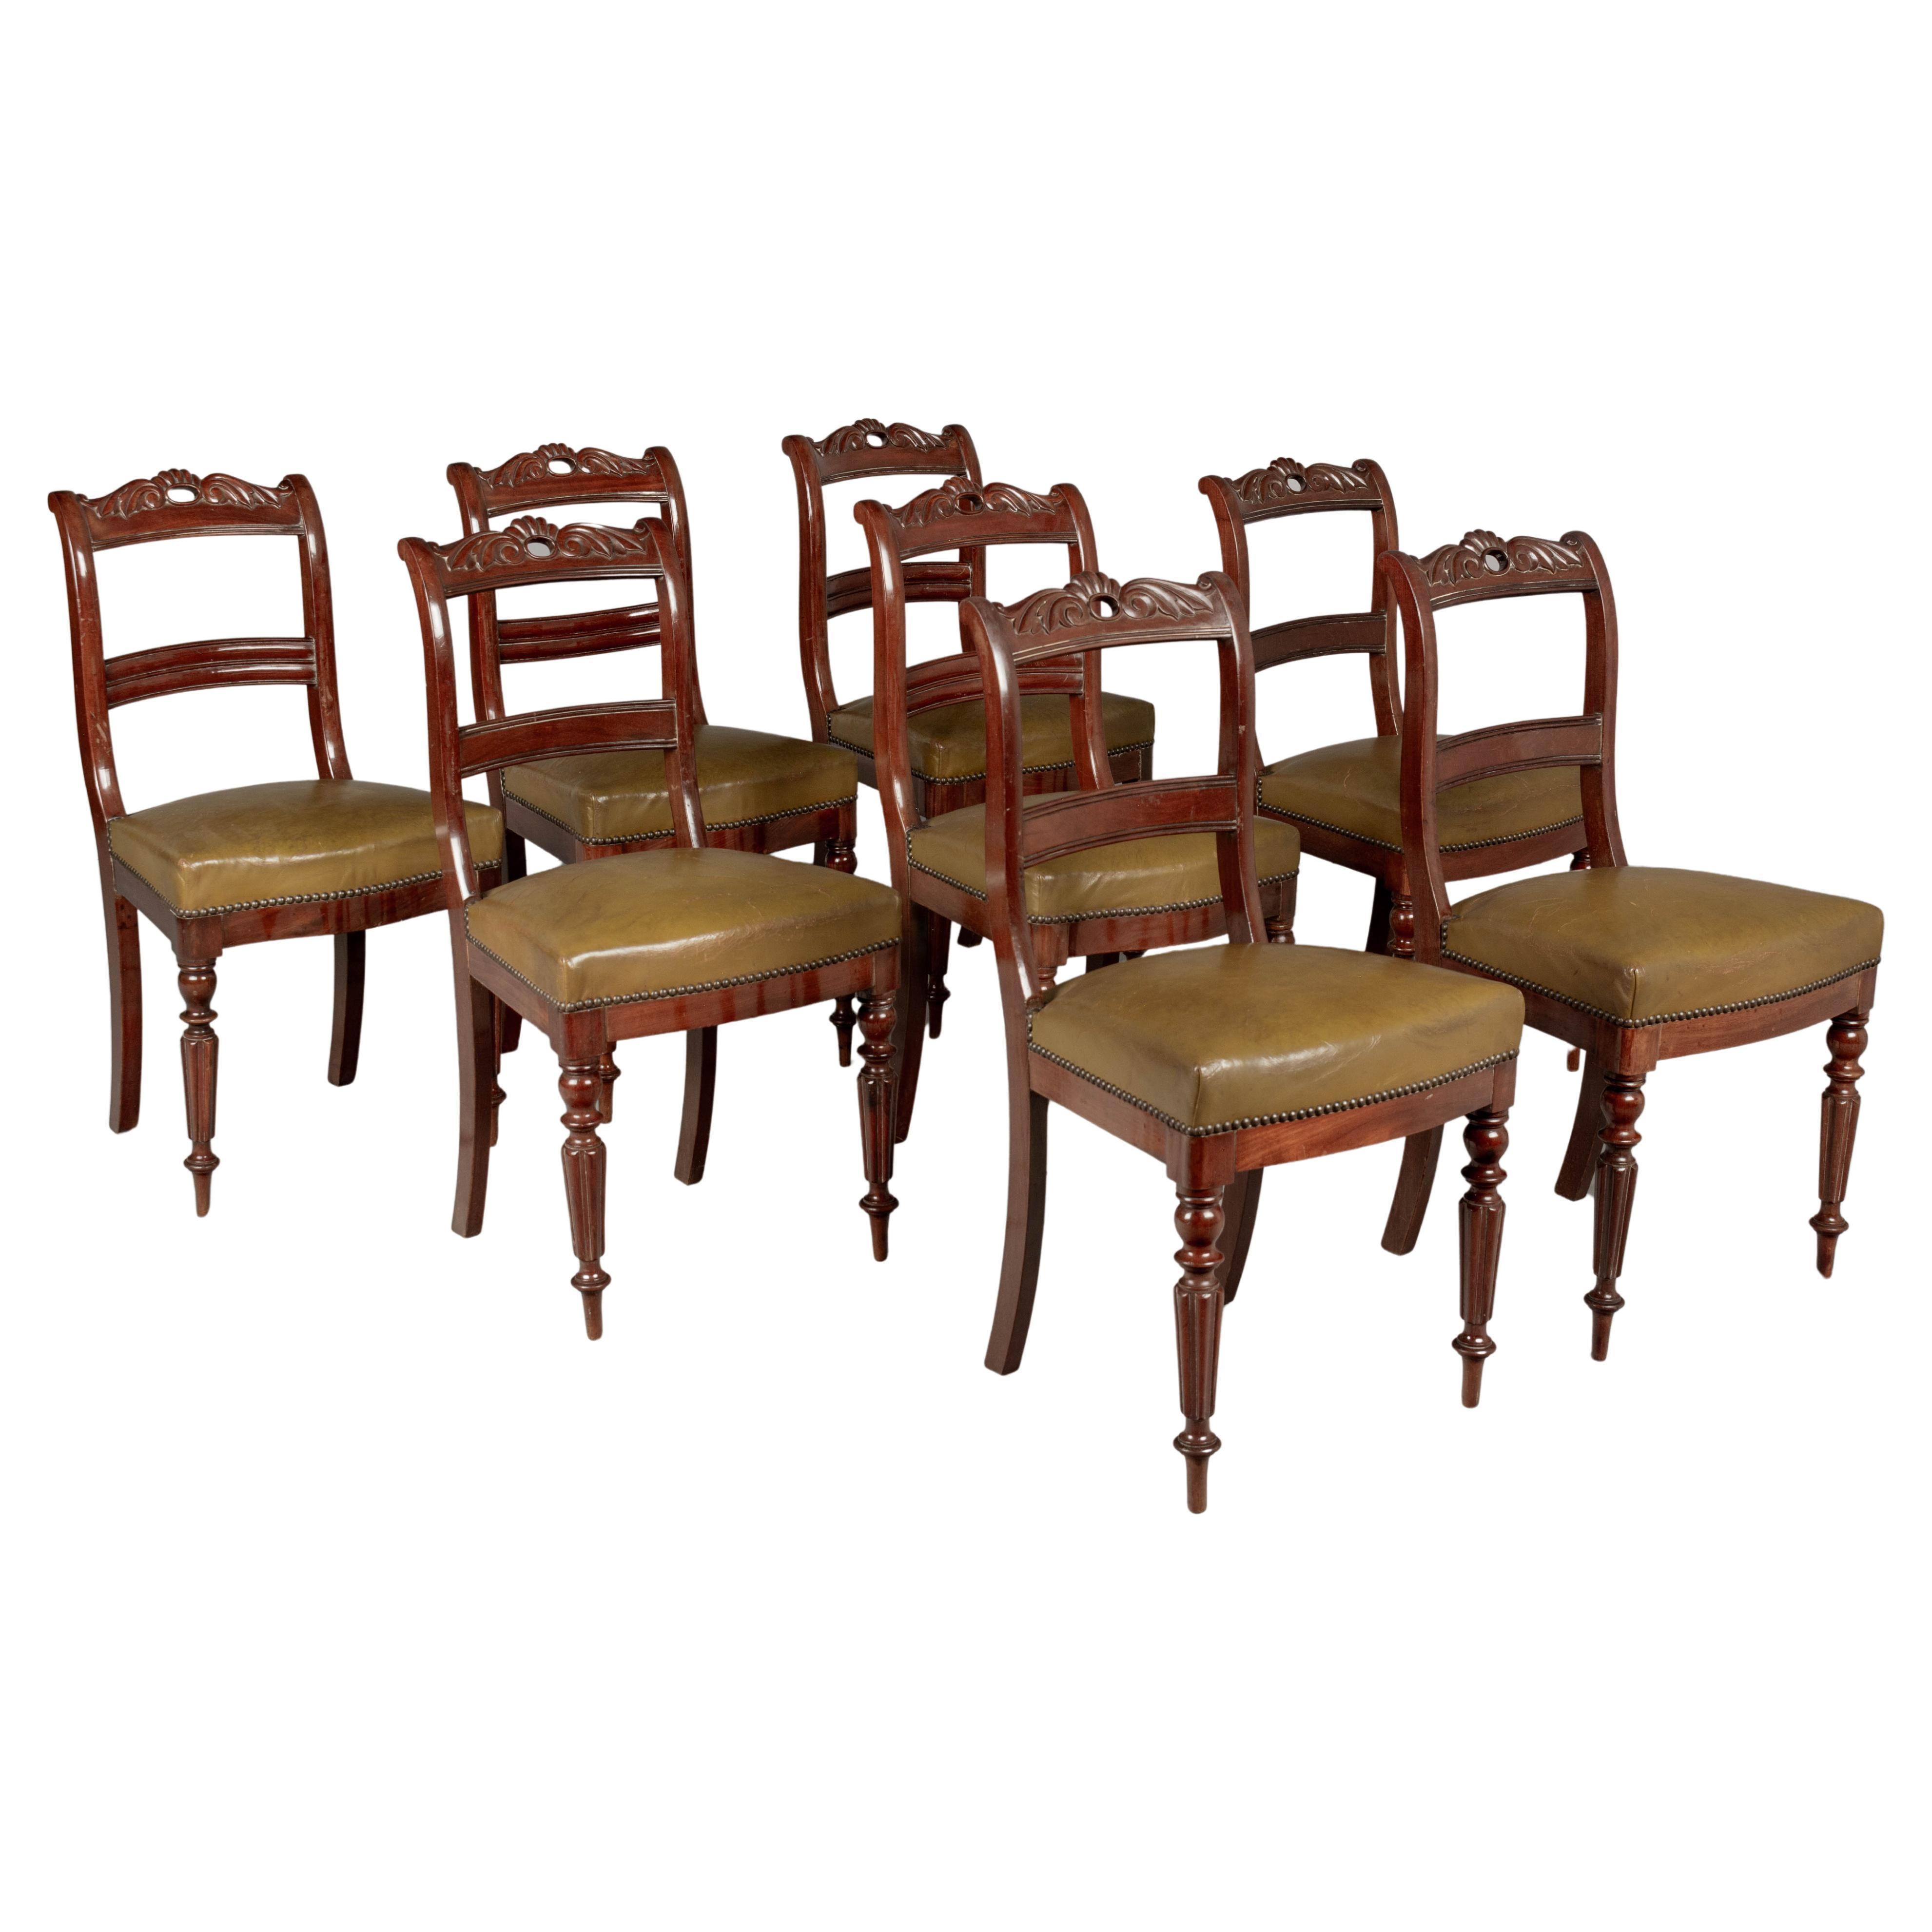 English Regency Style Mahogany Chairs, Set of 8 For Sale